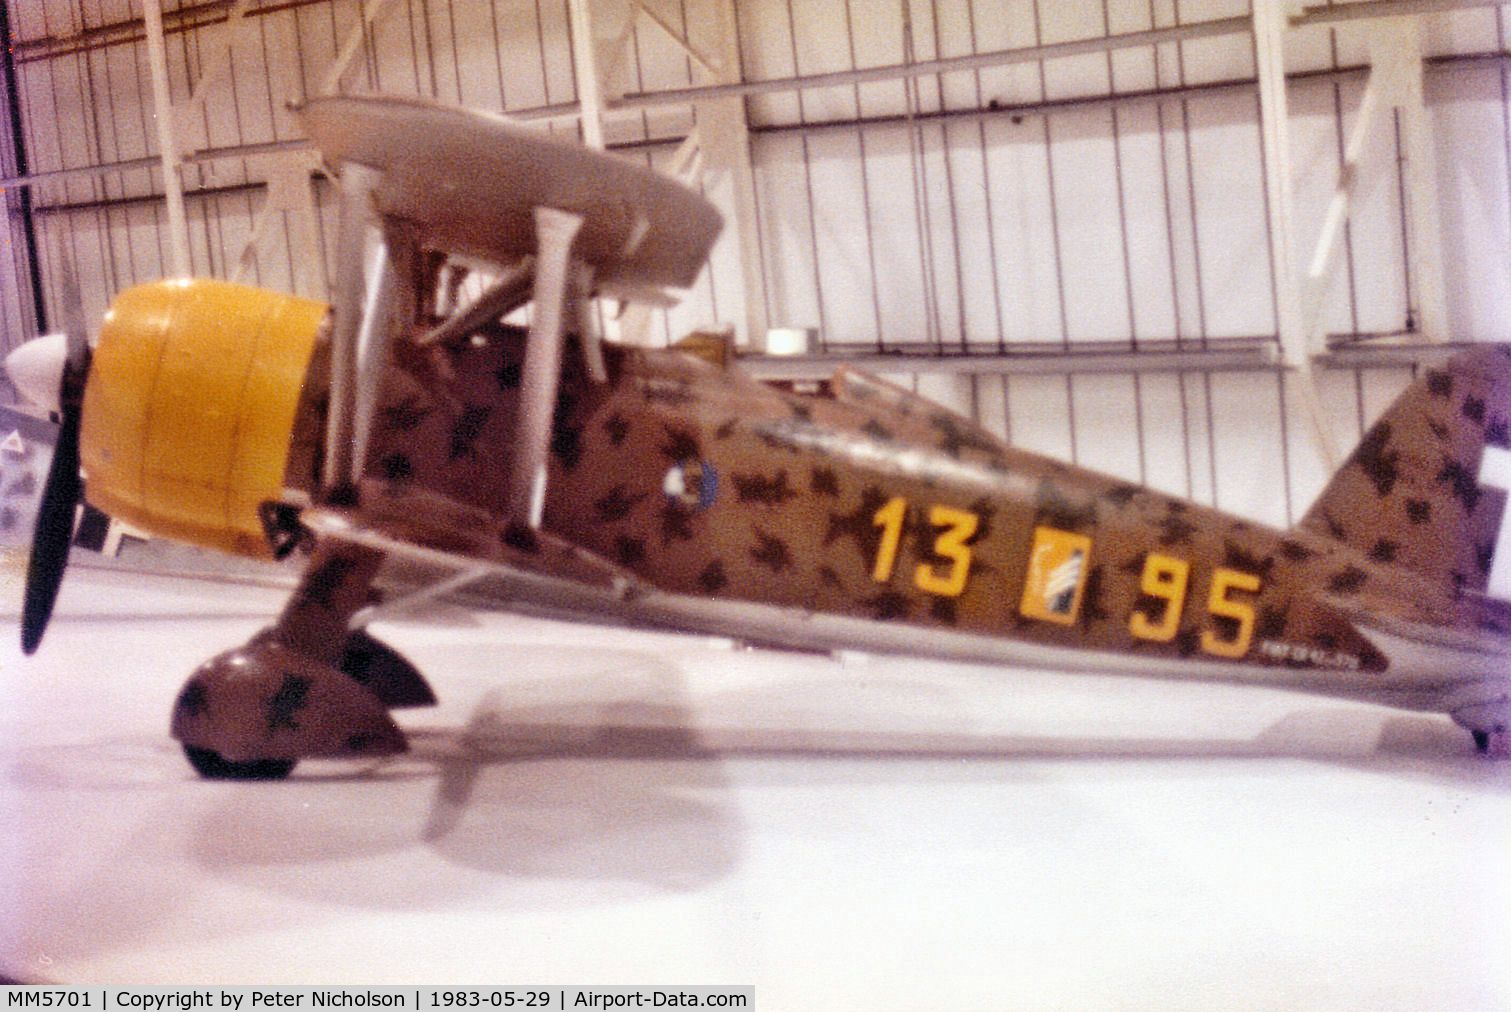 MM5701, Fiat CR.42 Falco C/N Not found MM5701, Fiat CR.42 Falcon as seen at the Royal Air Force Museum at Hendon in May 1983.